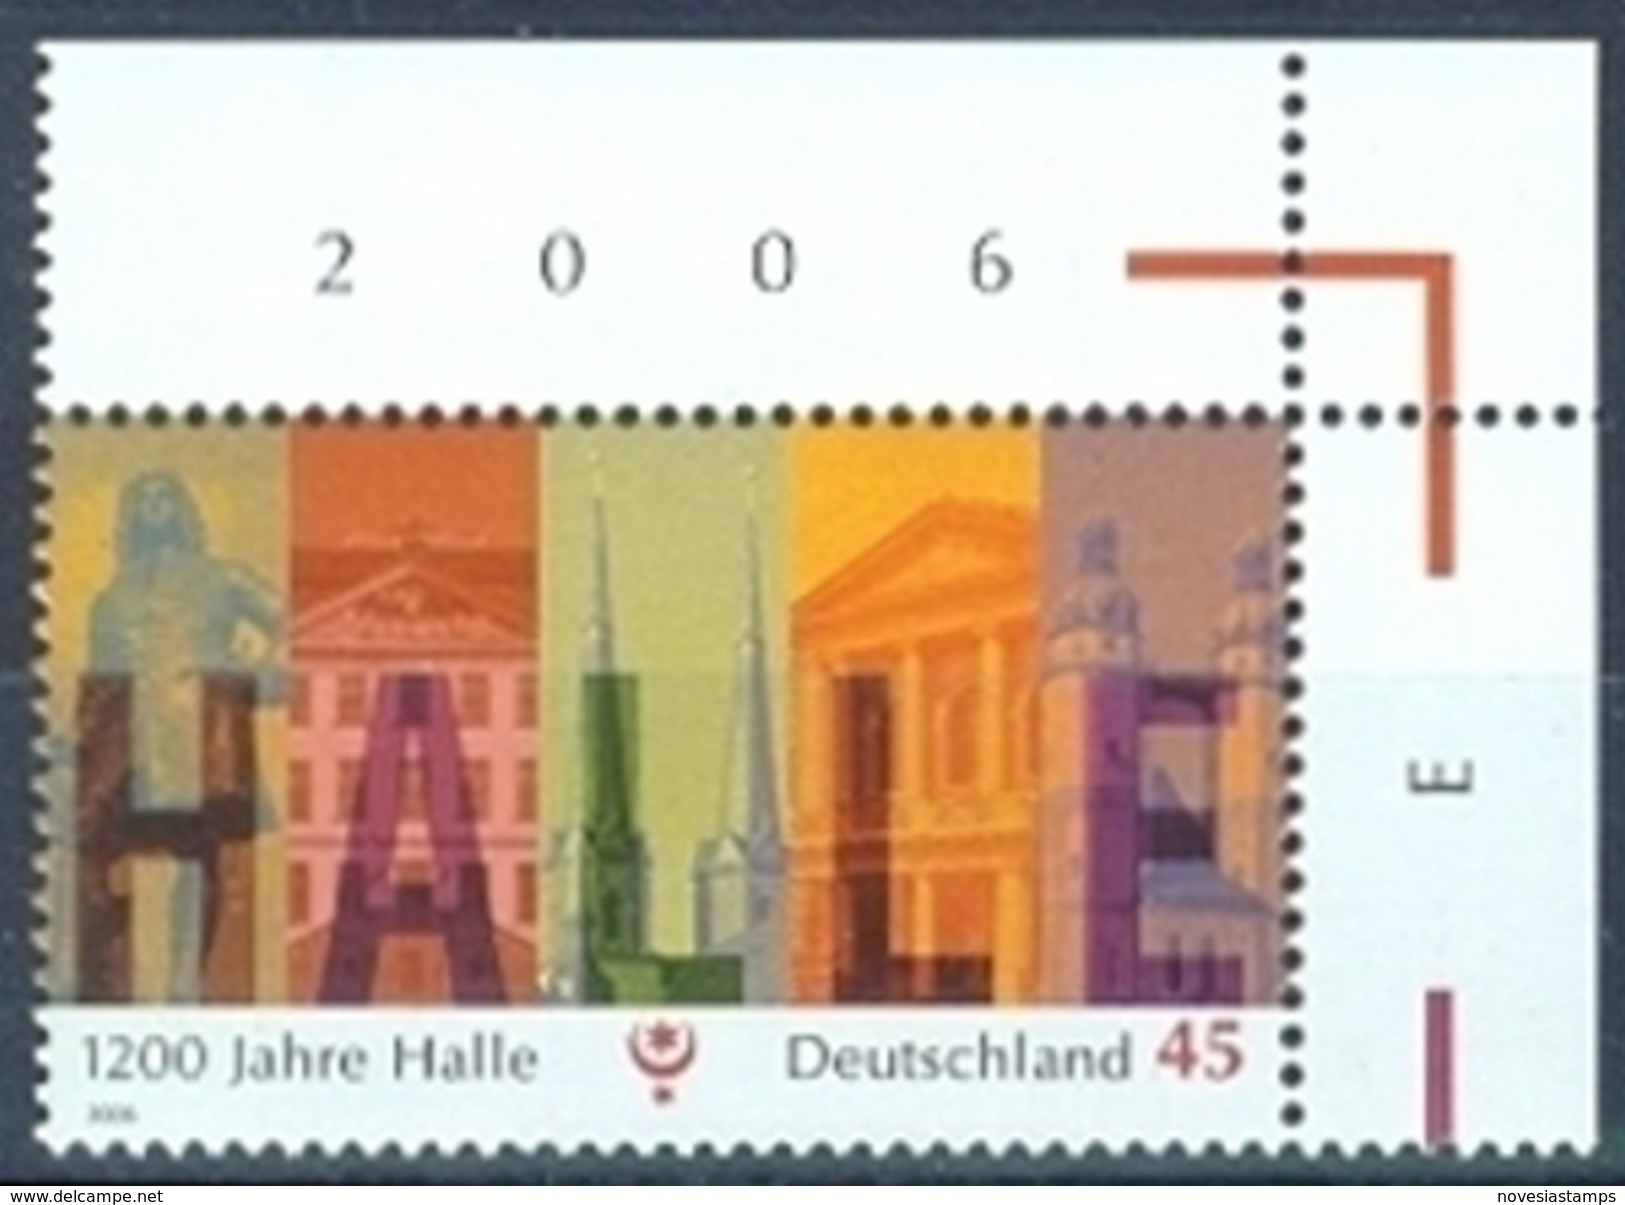 !a! GERMANY 2006 Mi. 2510 MNH SINGLE From Upper Right Corner -Town Of Halle - Ongebruikt